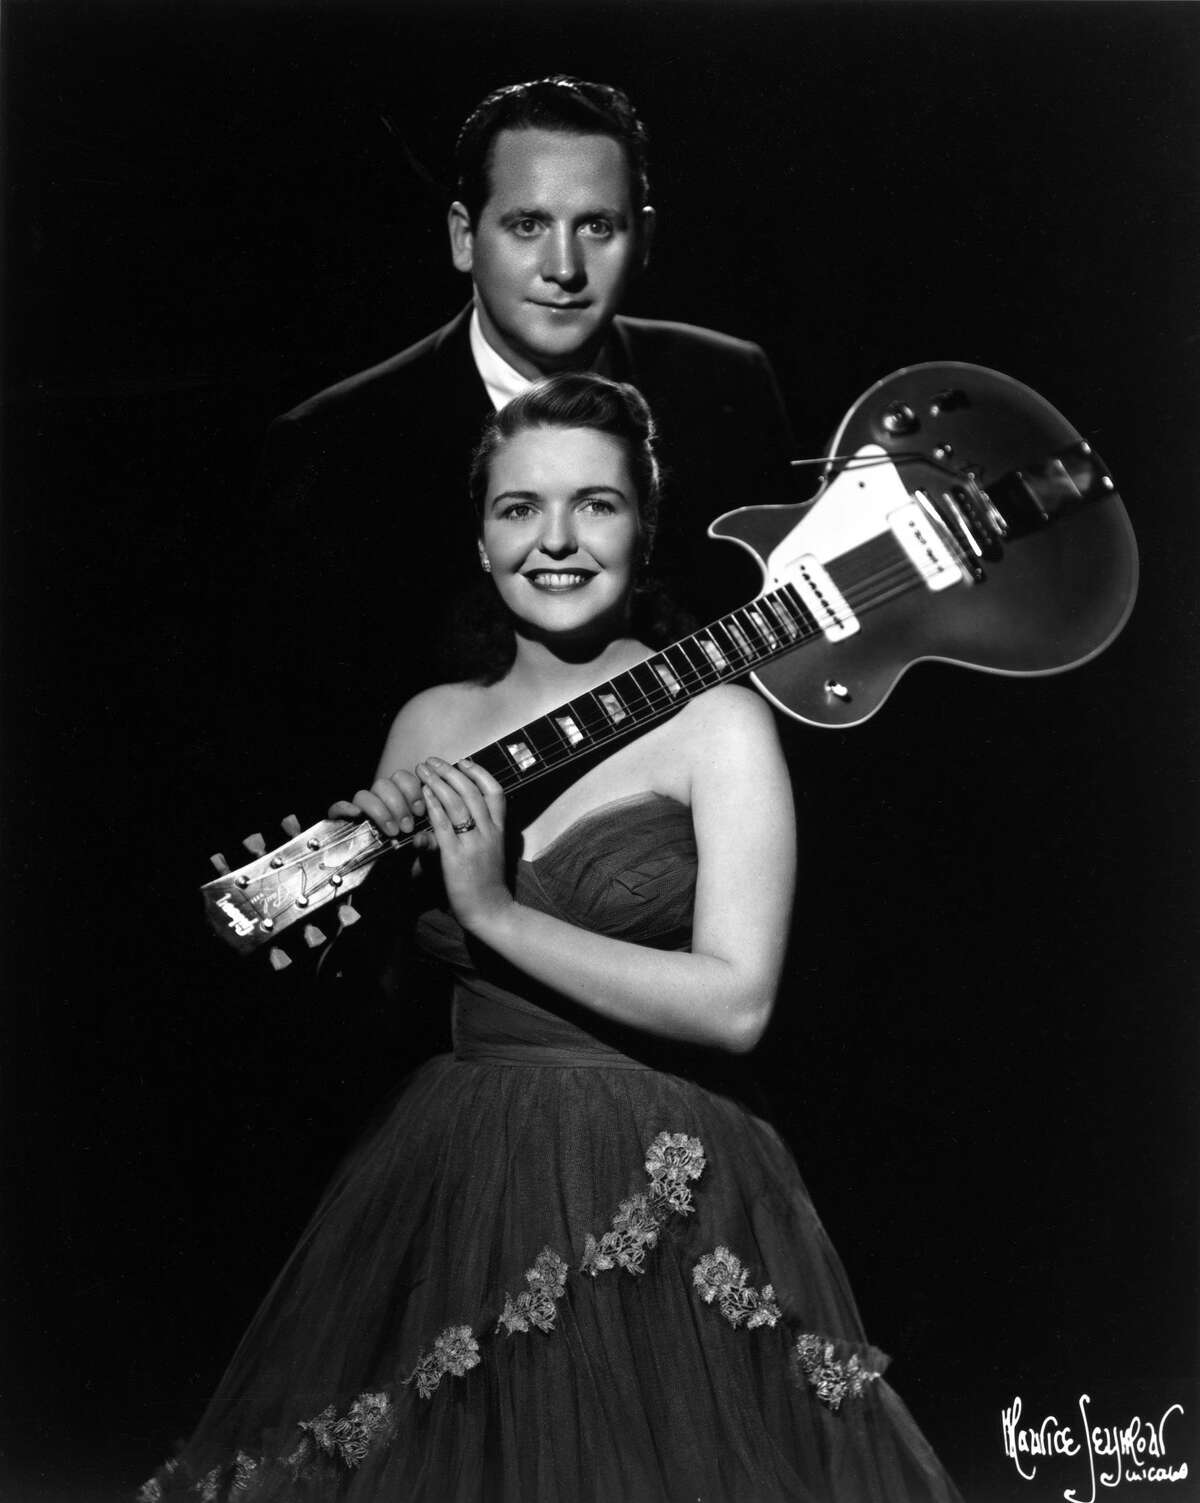 Les Paul, who performed with his wife, Mary Ford, created one of the first commercially successful solid-body electric guitars, the Gibson Les Paul in 1952. While Paul pitched the guitar to Gibson as early as 1940, there was little interest from the company until the Fender Broadcaster (later renamed the Telecaster) made its debut. The result was beyond anyone's wildest expectations — since the launch of Les Paul's guitar line 63 years ago, it has become an legendary icon of rock and roll and has been a favorite of guitarists the world over. Paul died in 2009. Click through the images in this slideshow to see just a few of the famous guitarists who have played Gibson Les Pauls over the years.